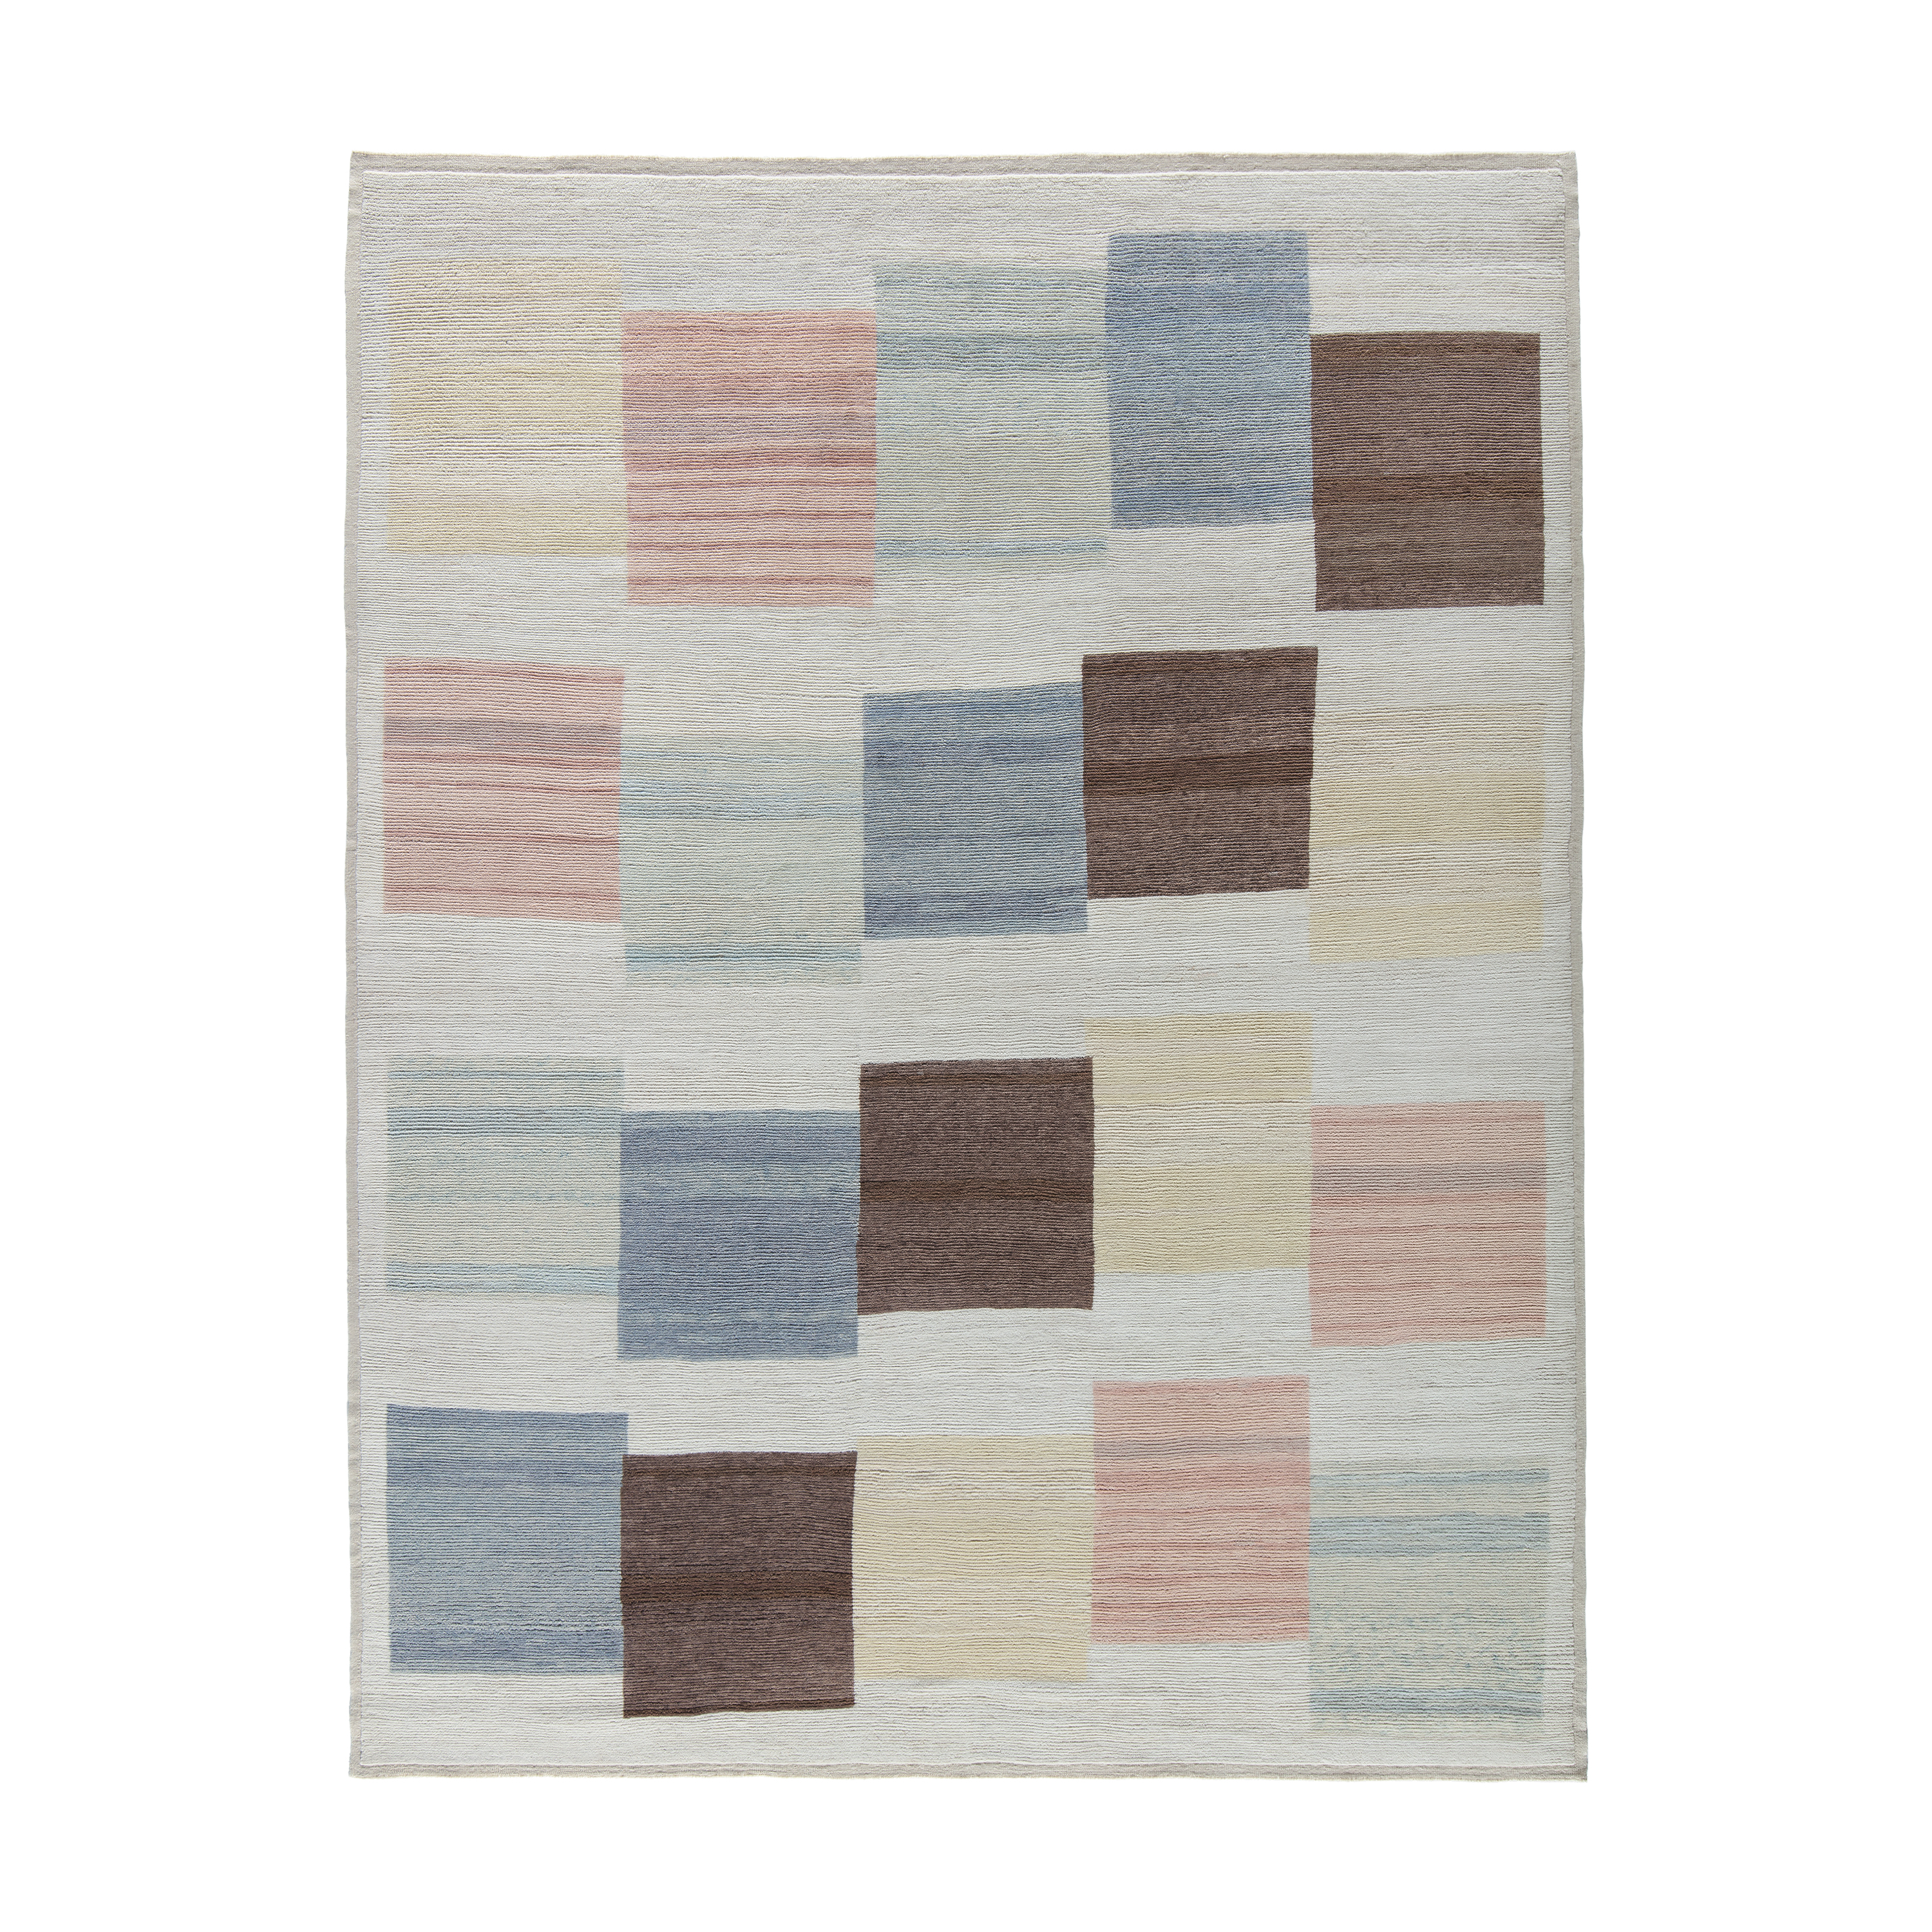 This Offset rug is hand-knotted and made of 100% wool. 